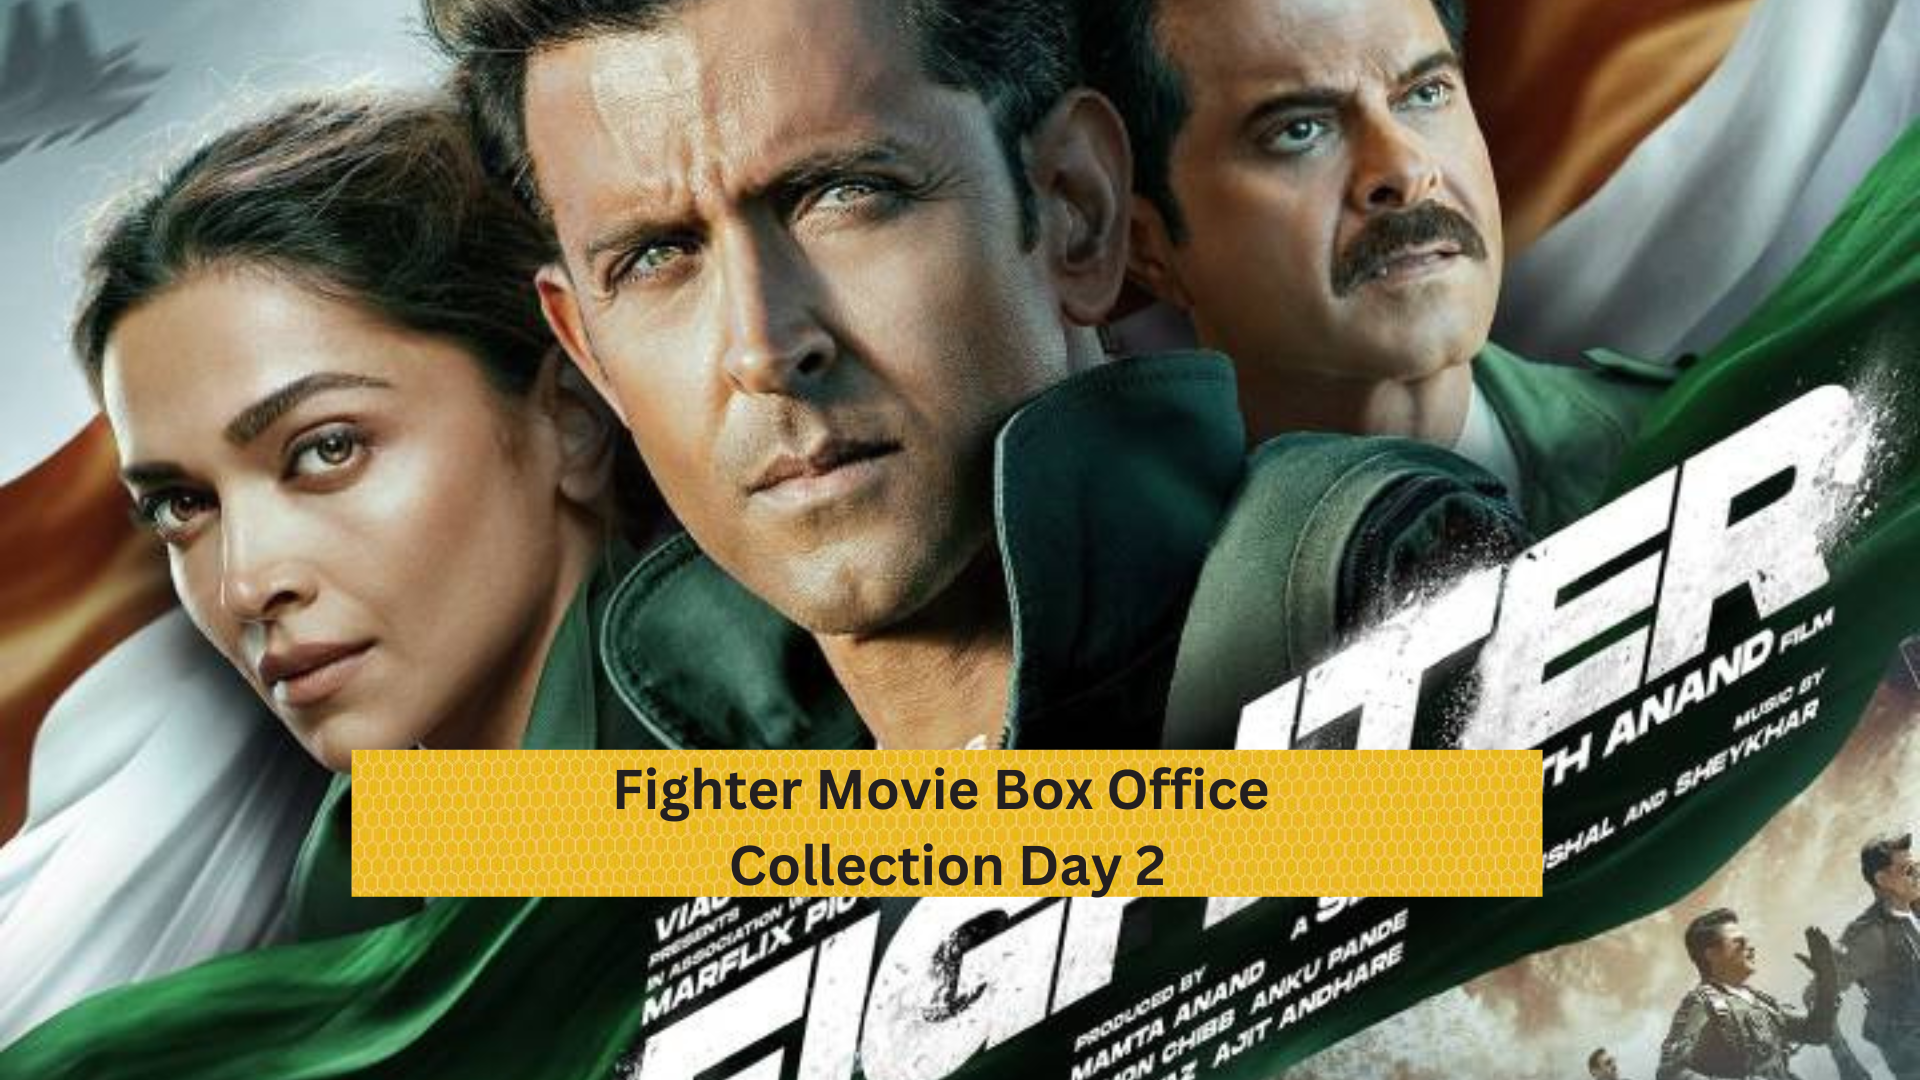 Fighter Movie Box office Collection day 2